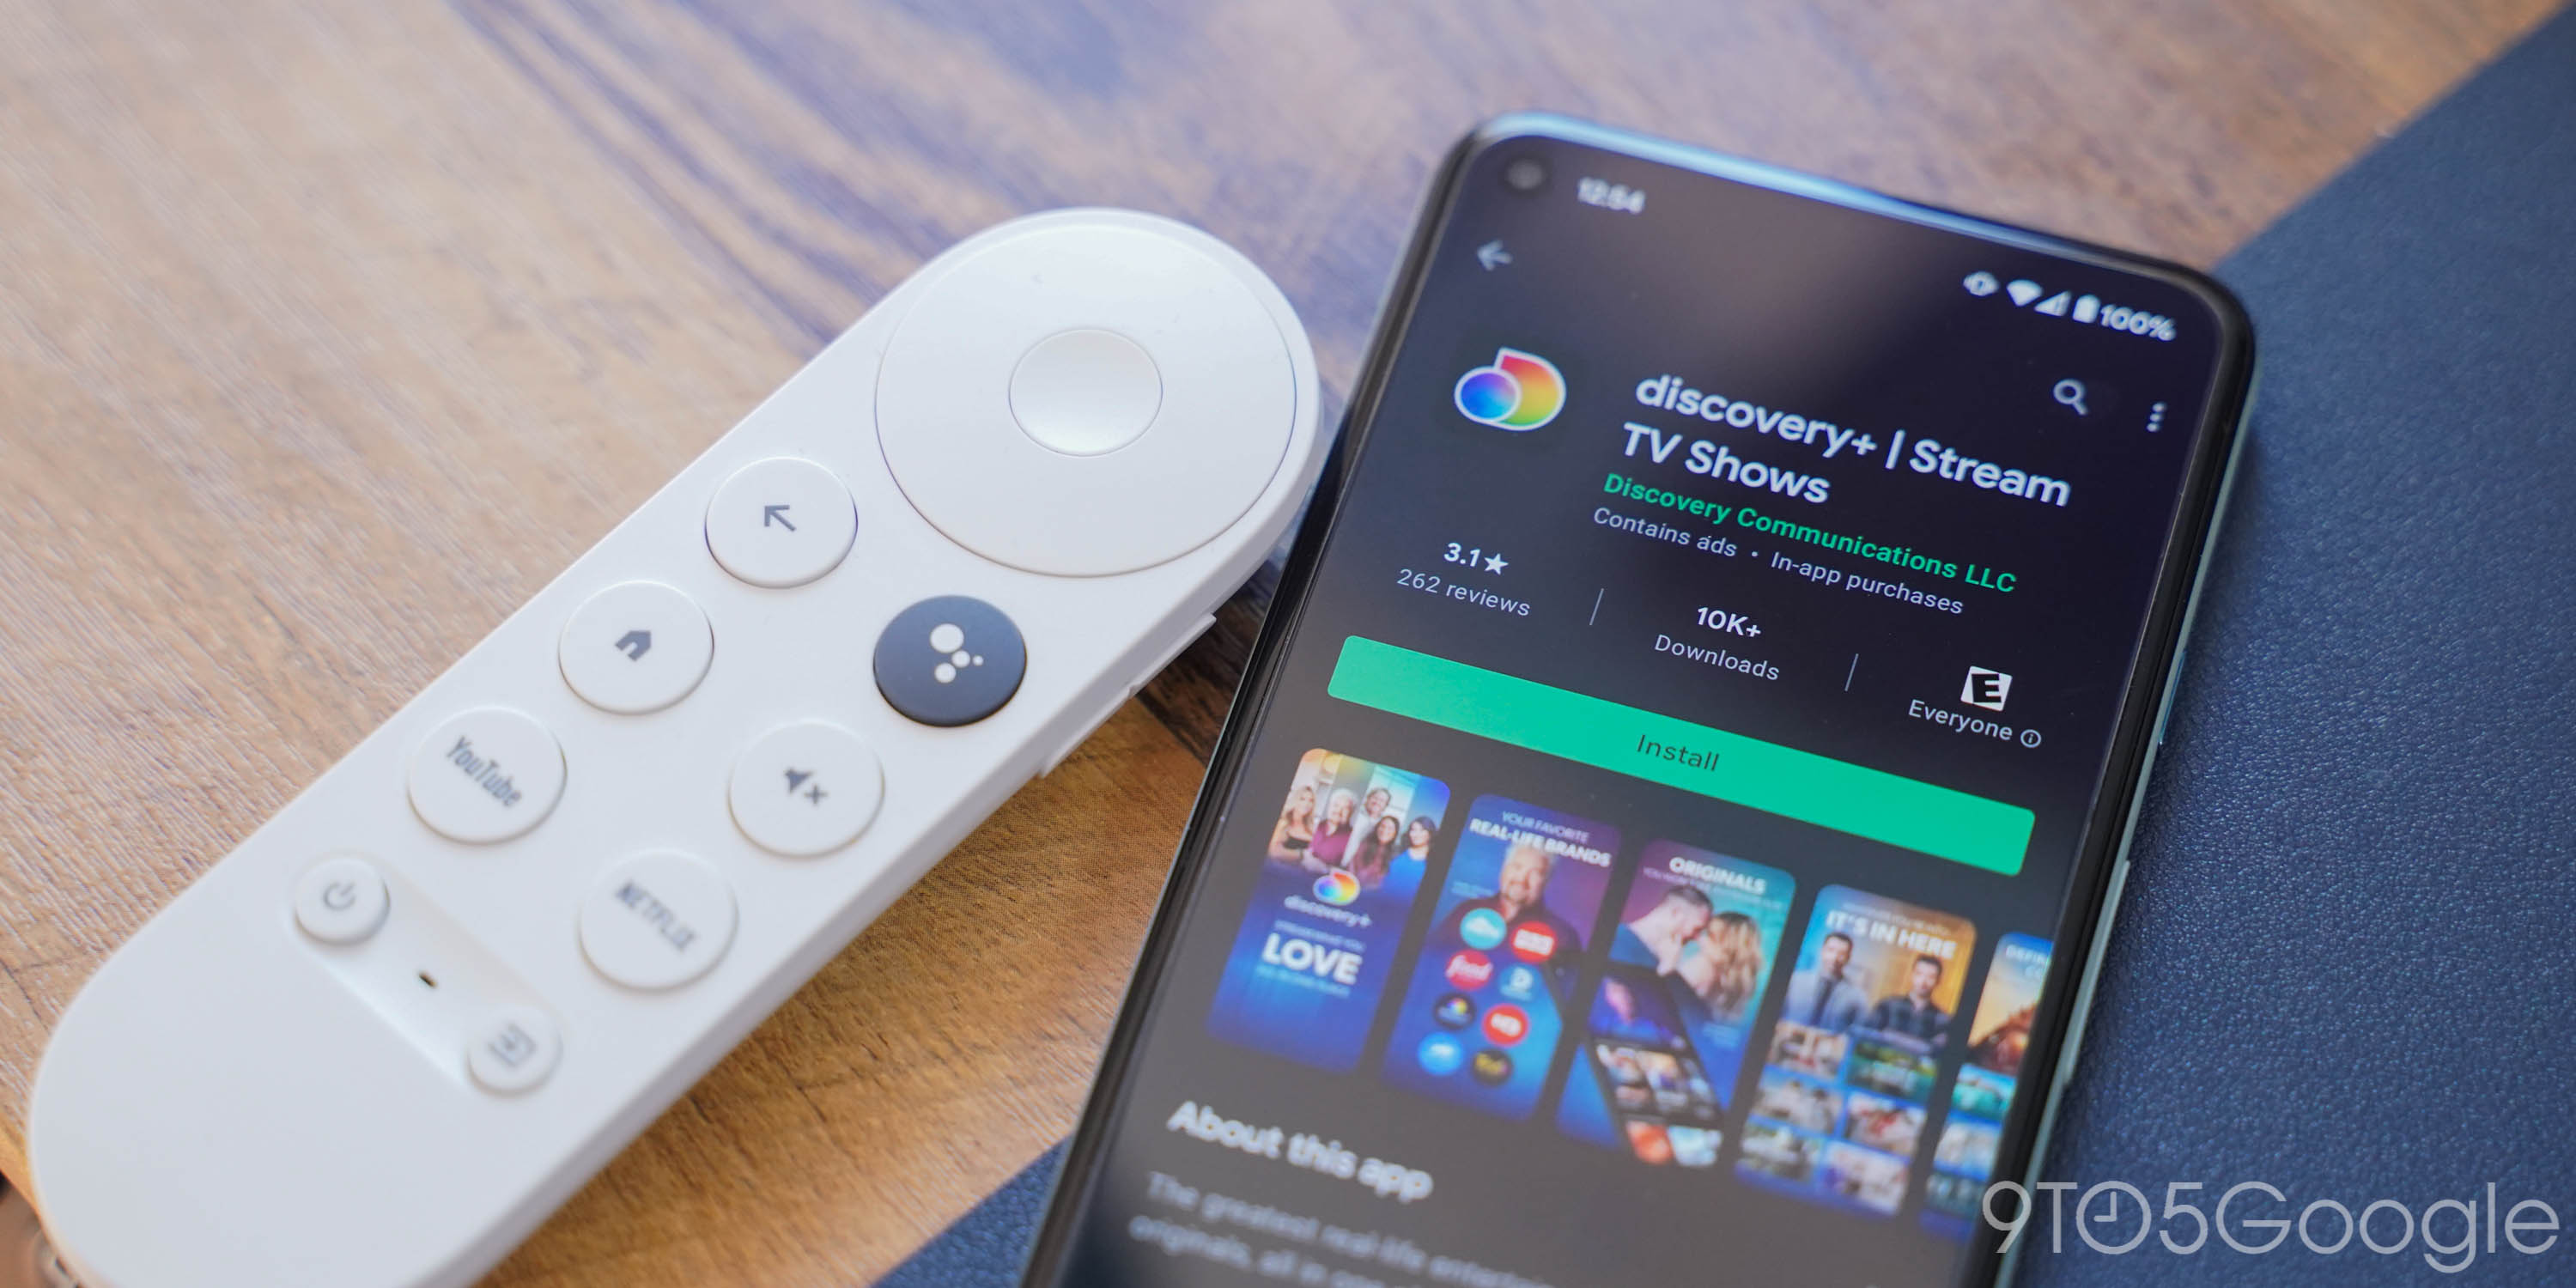 Discovery+ is now available on Android, Chromecast w/ Google TV, Android TV